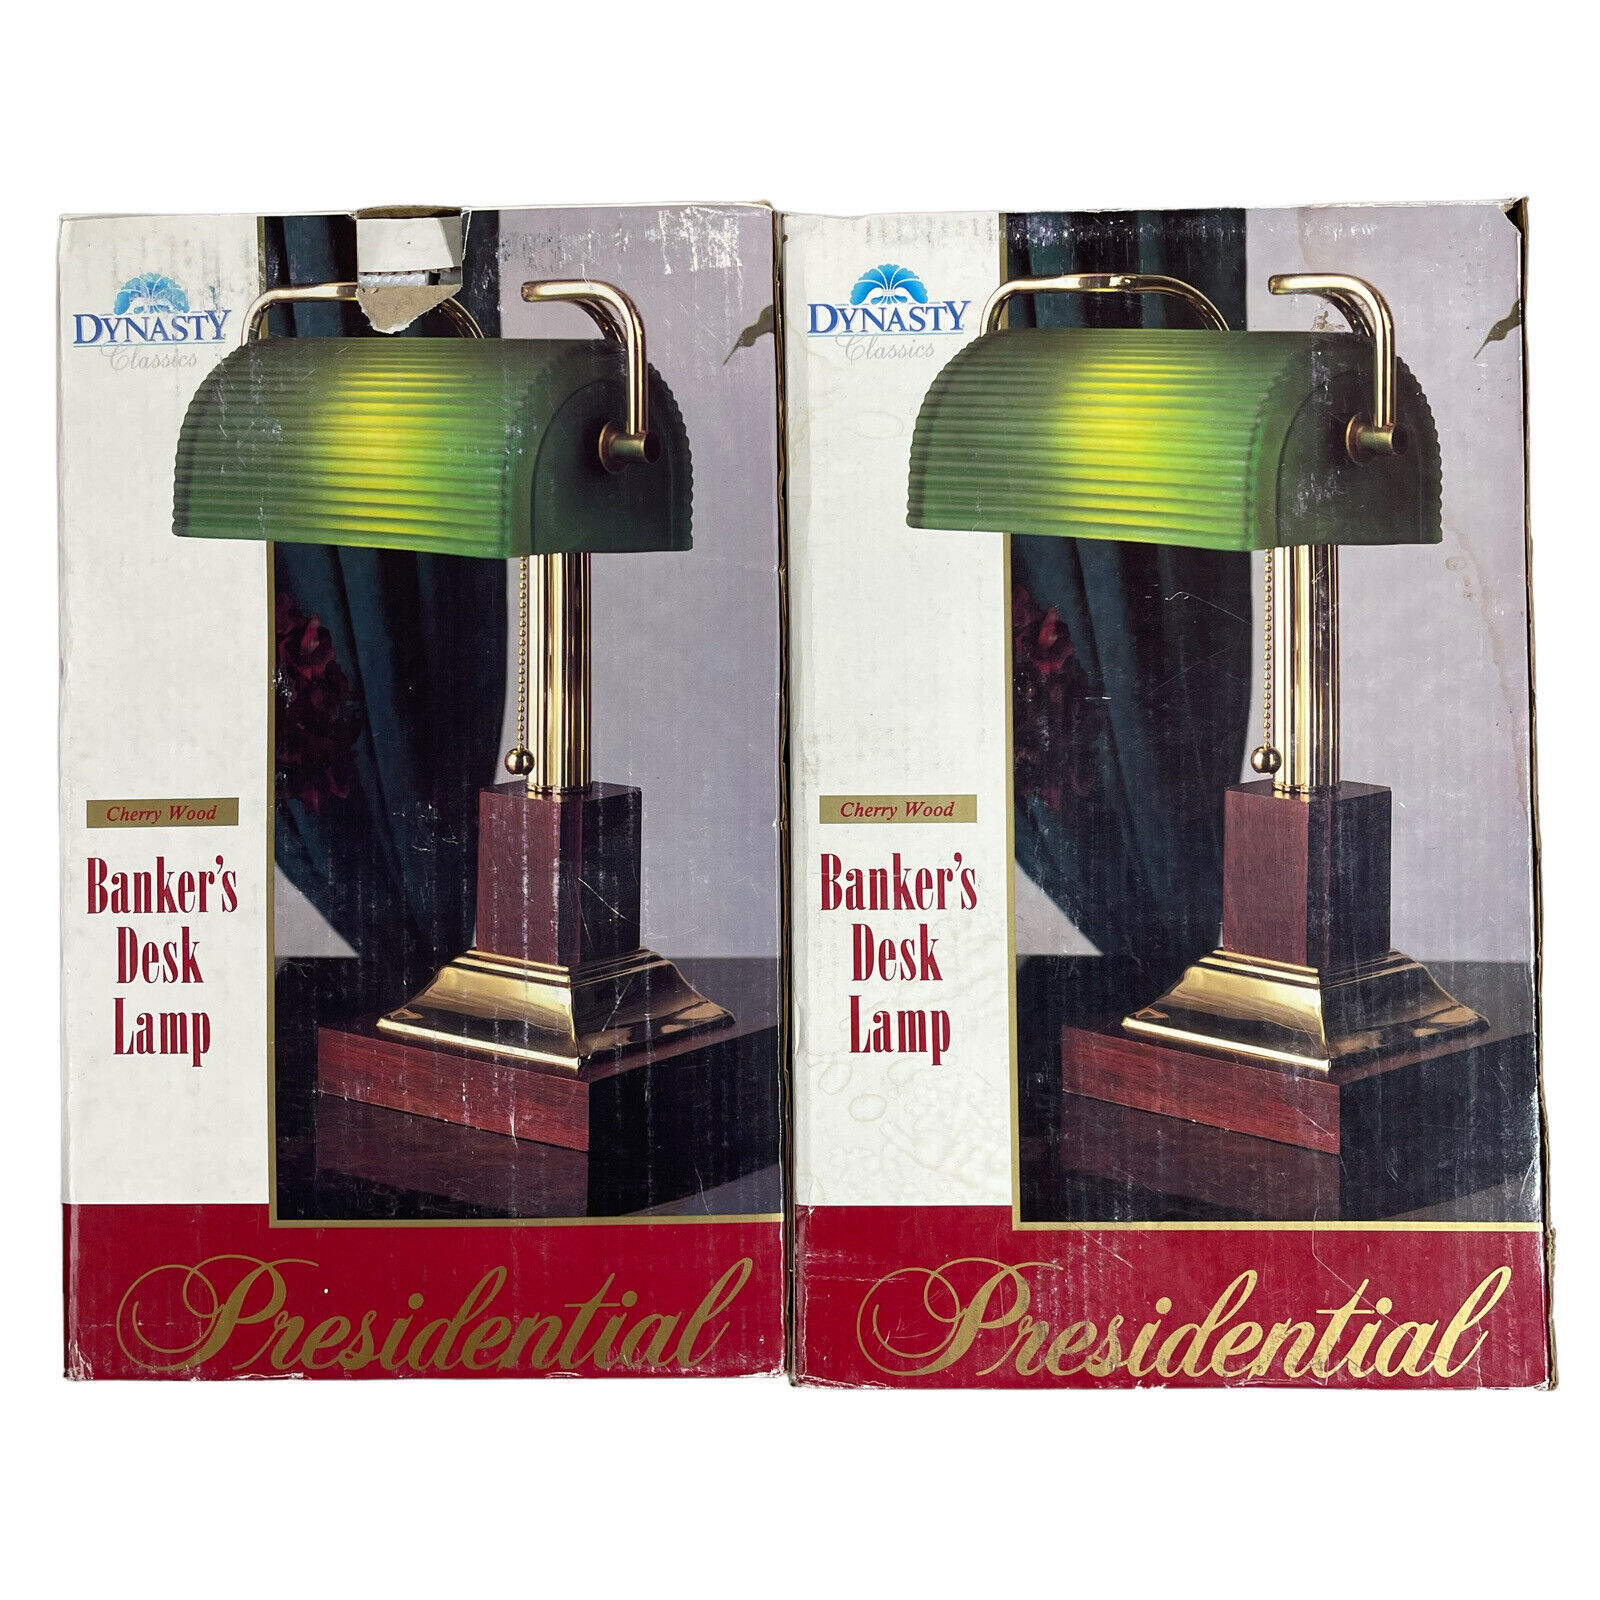 Lot of 2 ( Pair ) NOS Dynasty Classic Presidential Bankers Desk Lamp Cherry Wood